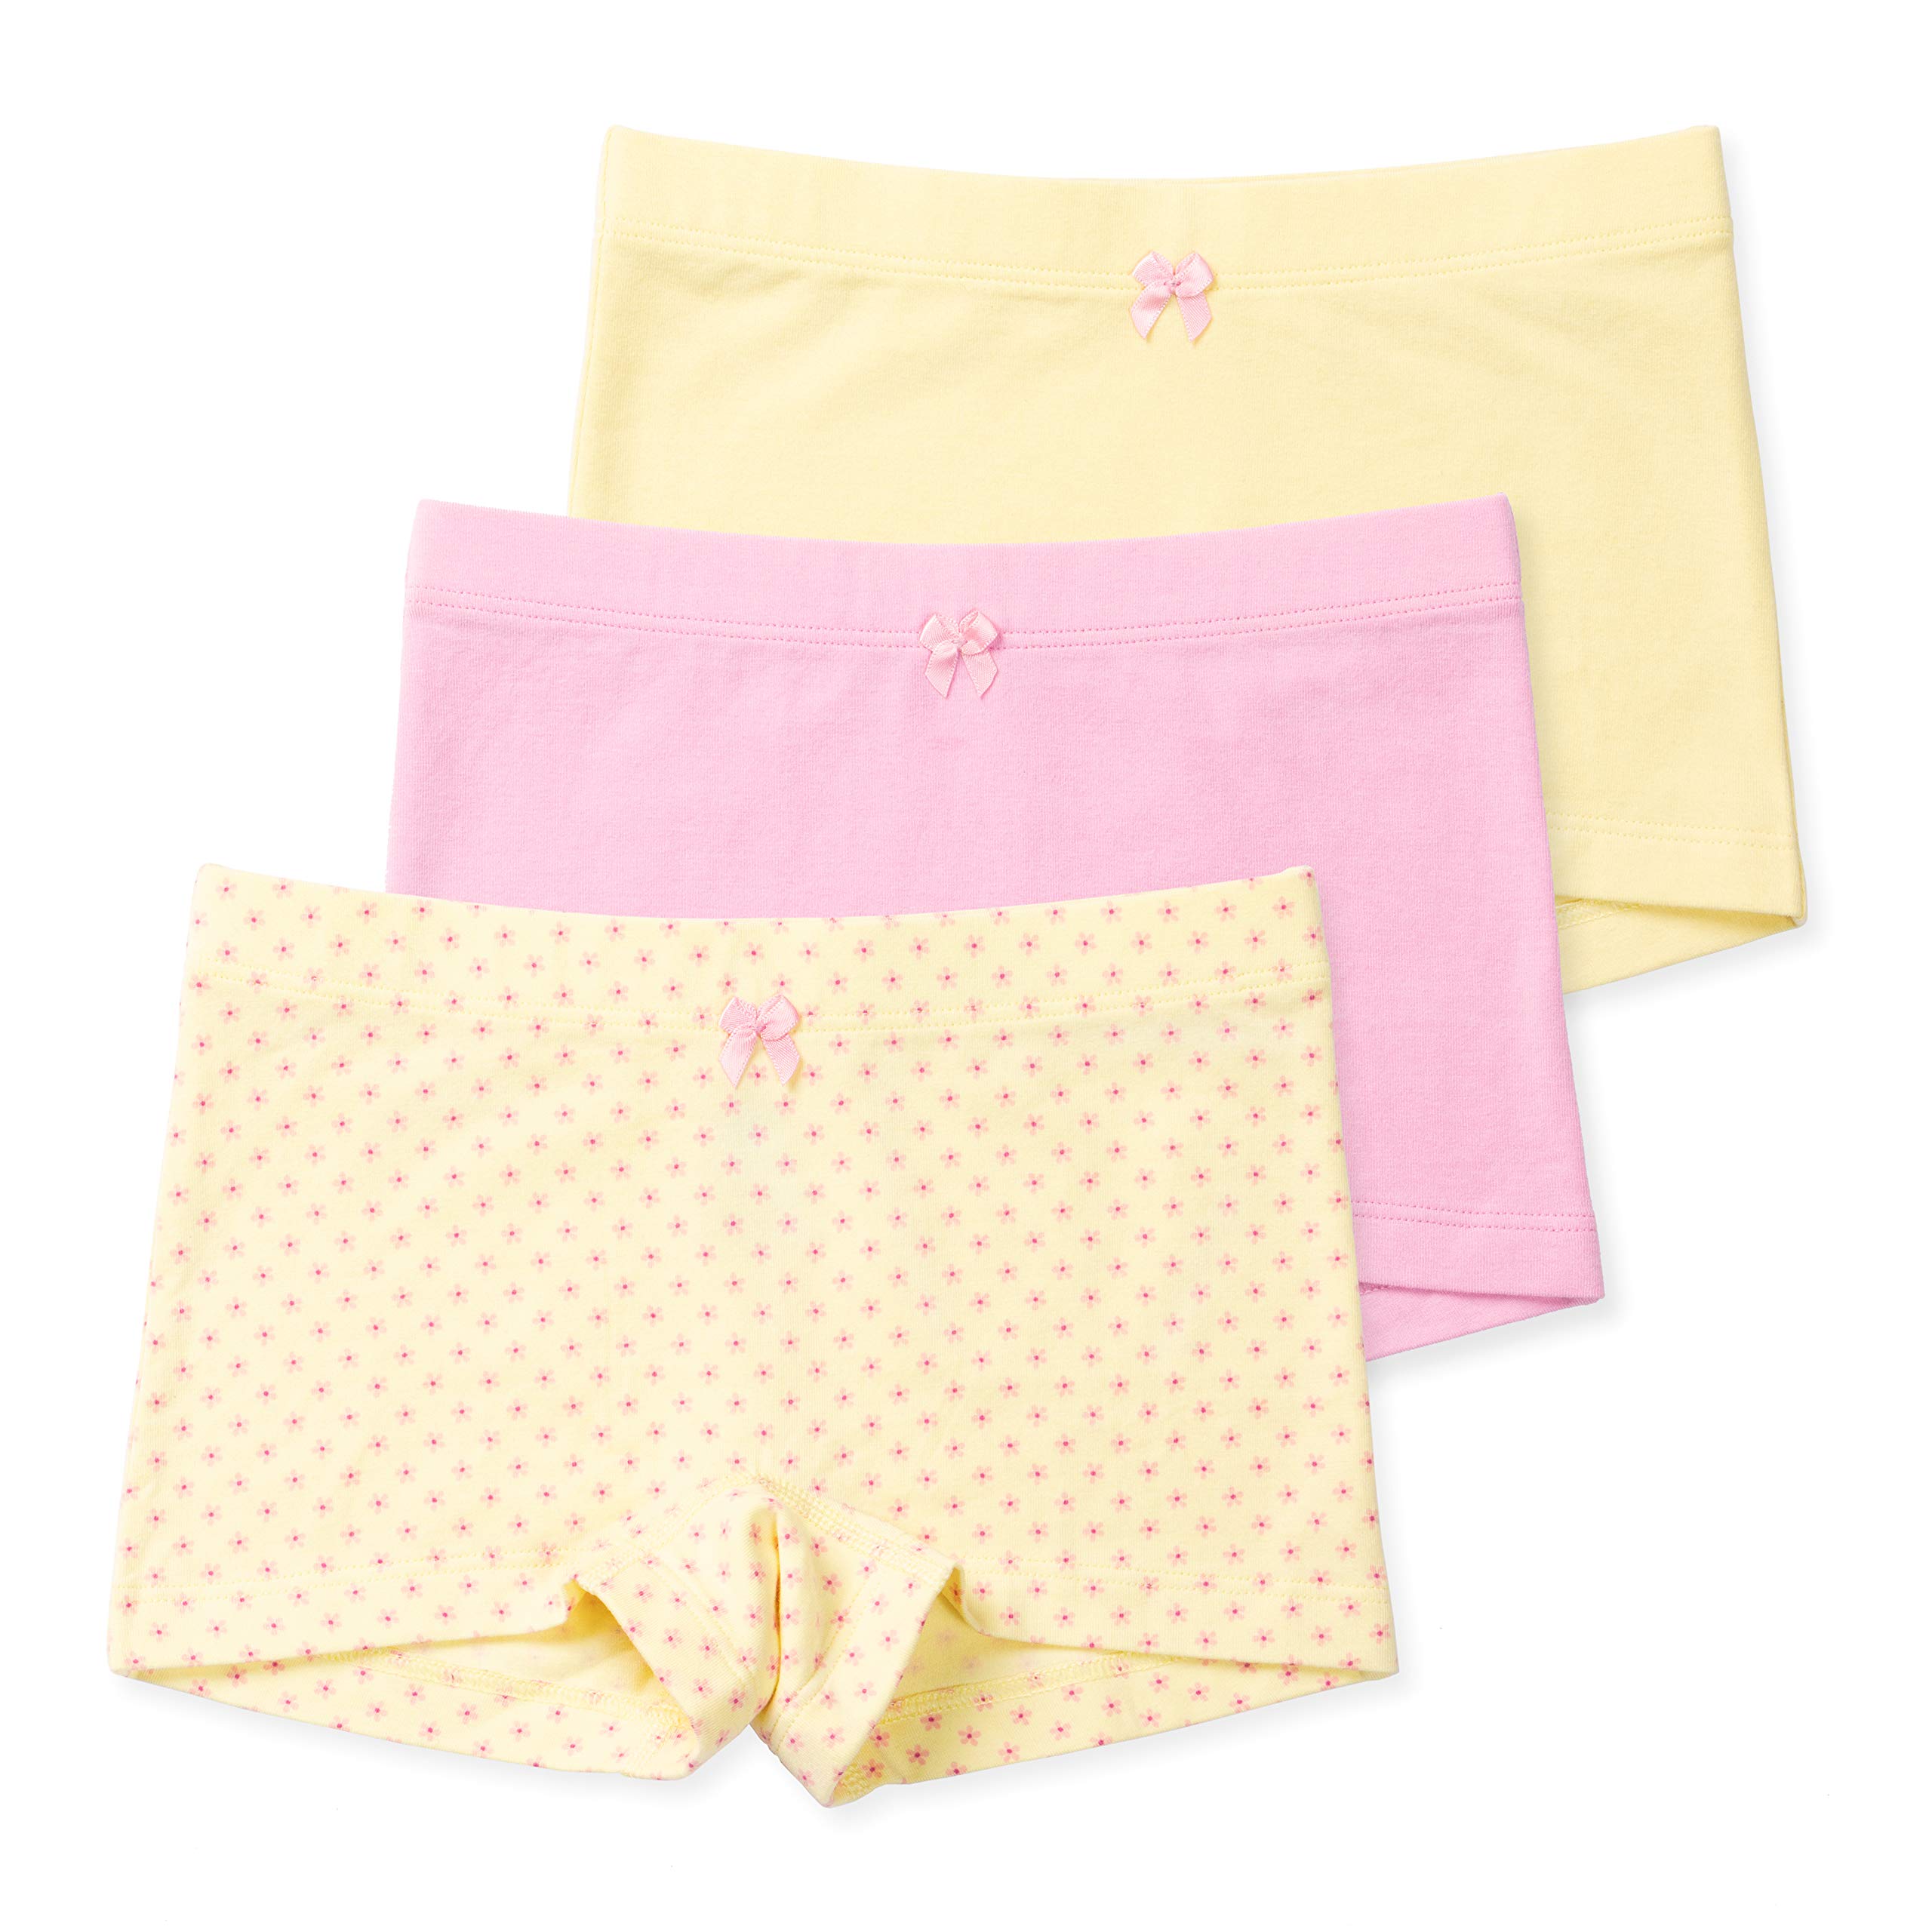 Lucky & Me Girls Undershorts for Under Dresses and Uniforms